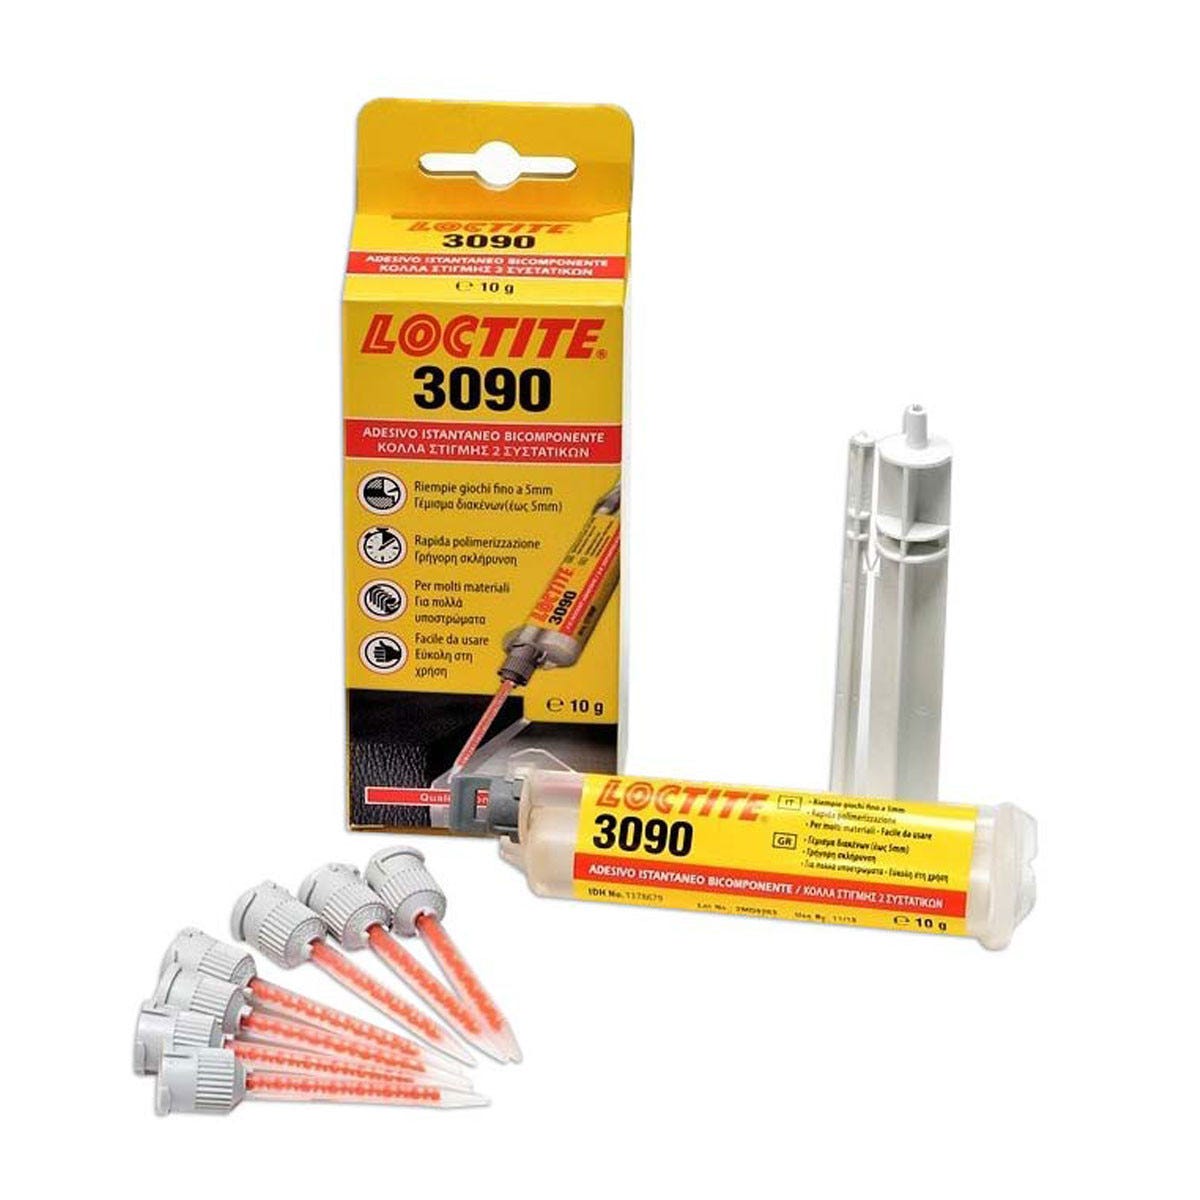 LOCTITE 3090 COLLE ULTRA PUISSANTE ADHESIF INSTANTANE COLLE PRO 1379570 0